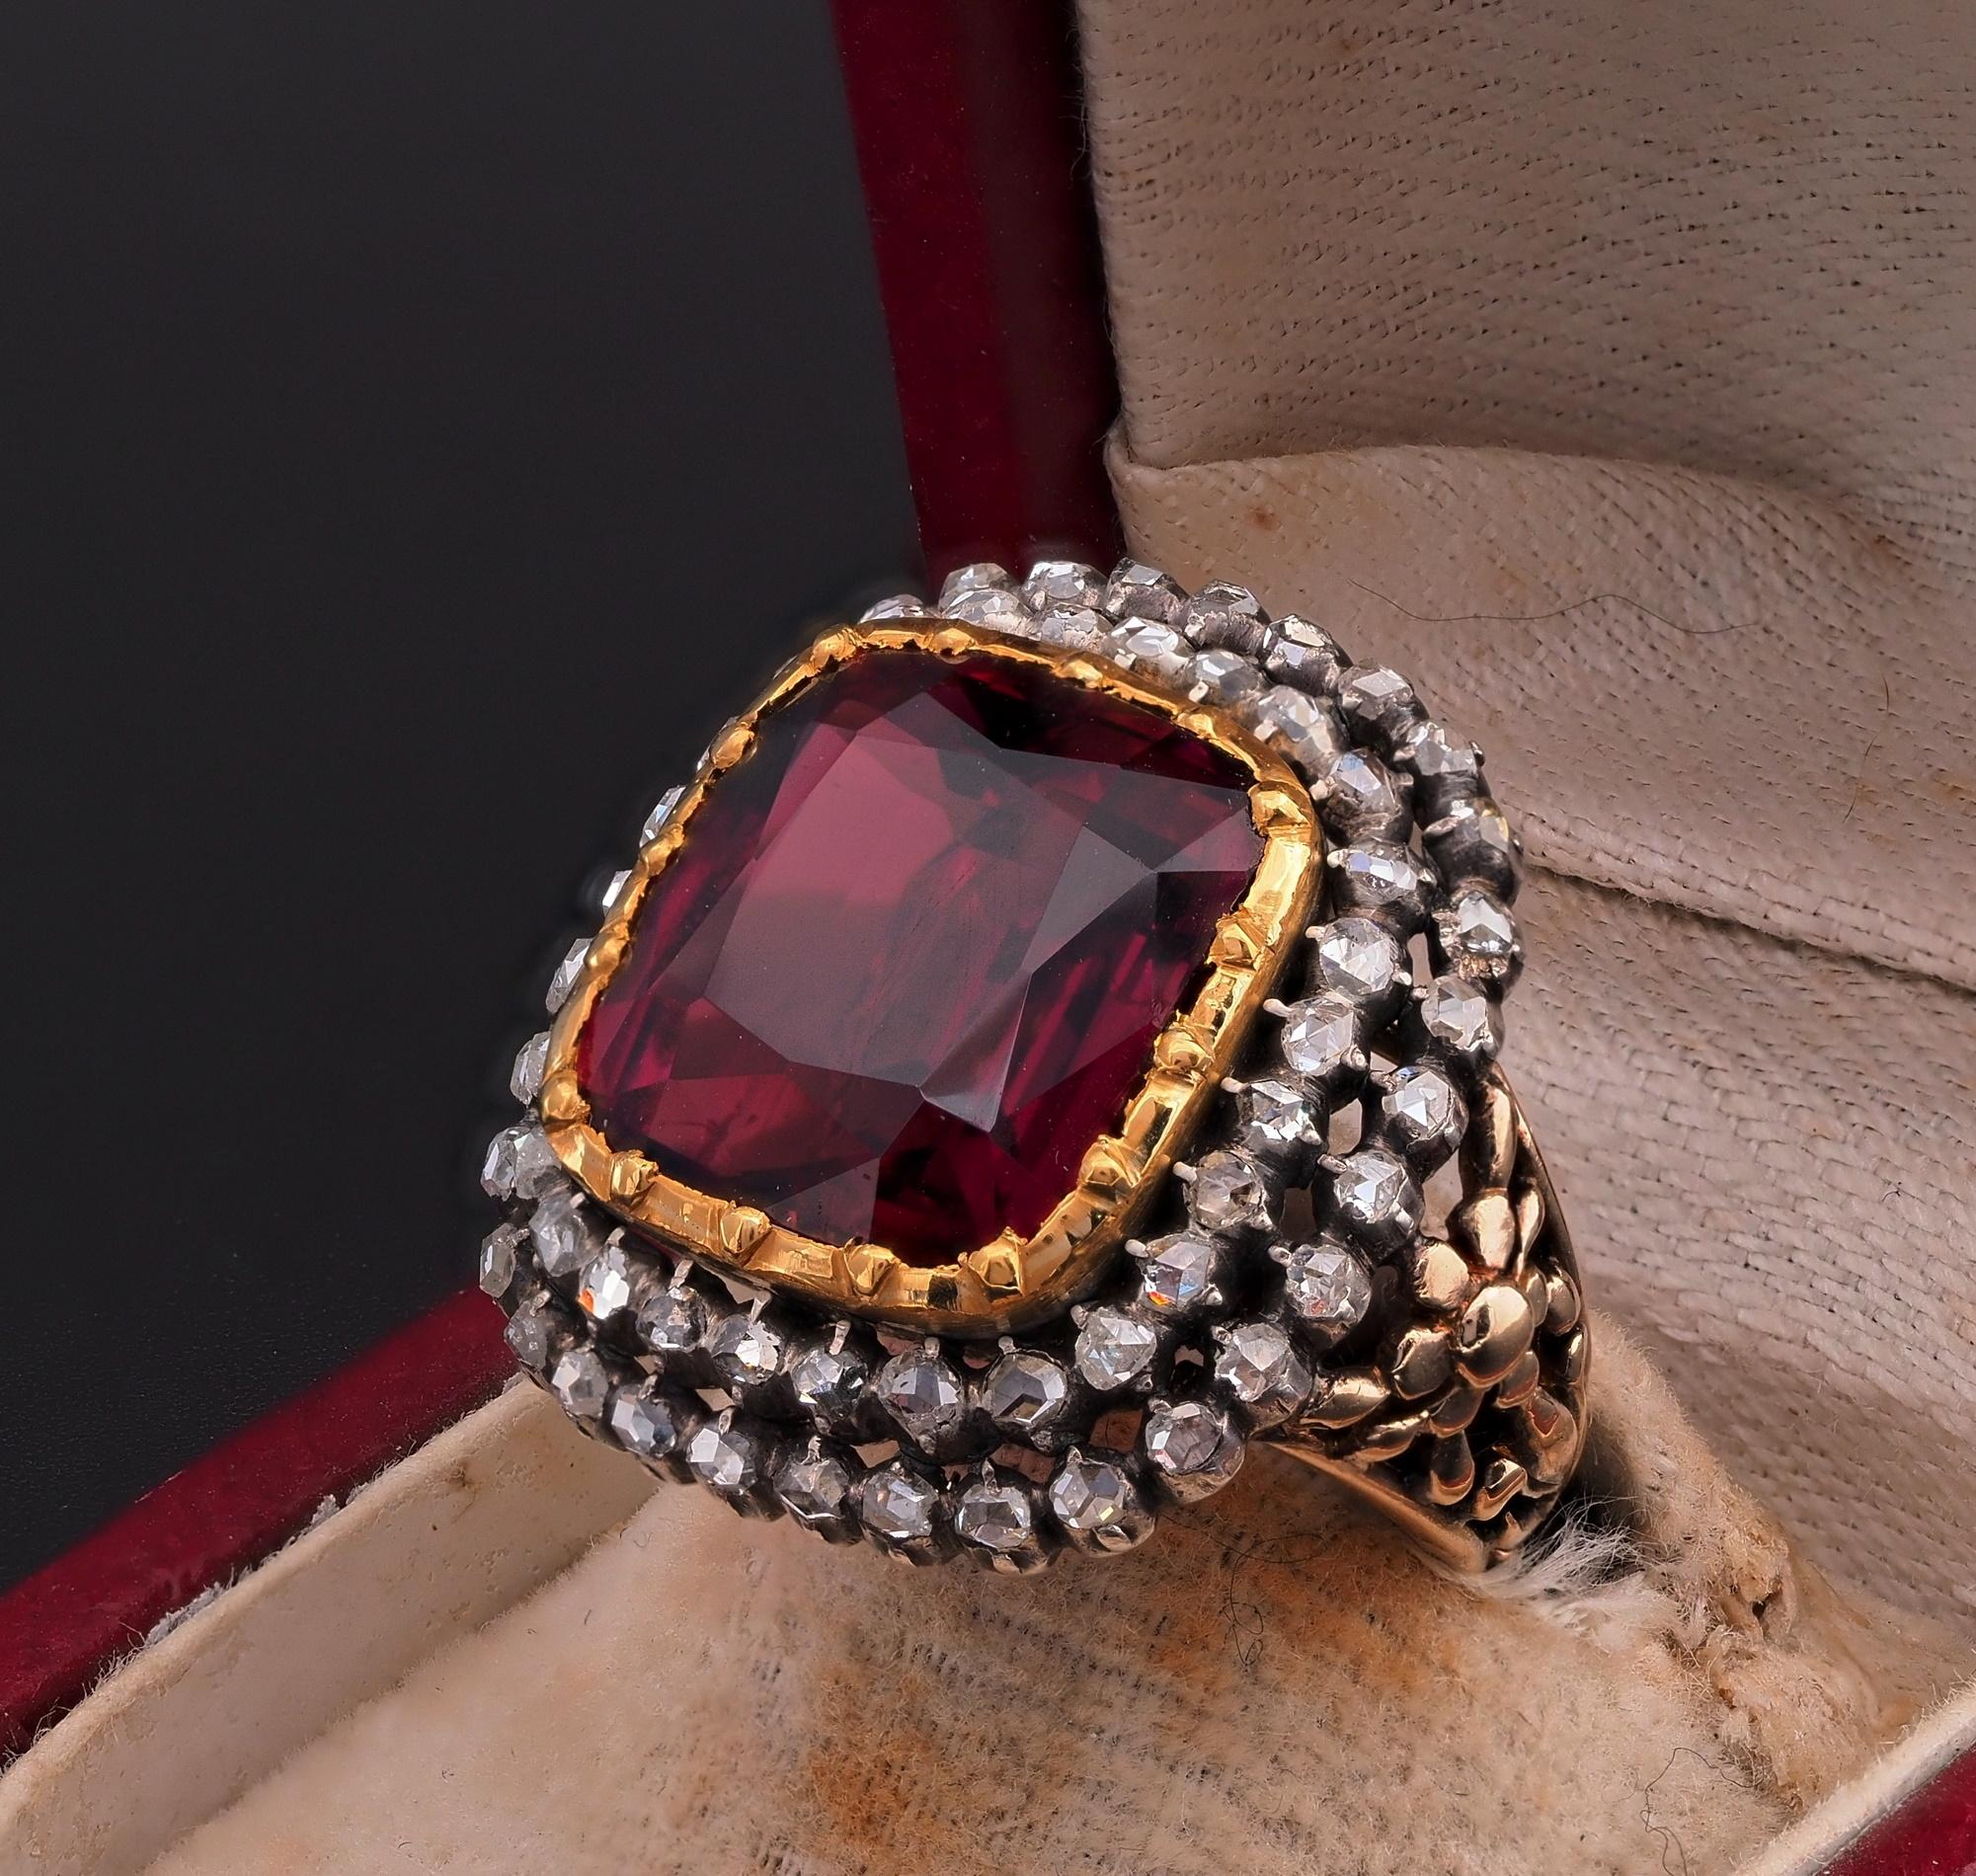 Victorian 10.95 CT Untreated Magenta Rubellite or Red Tourmaline Diamond Ring For Sale 5